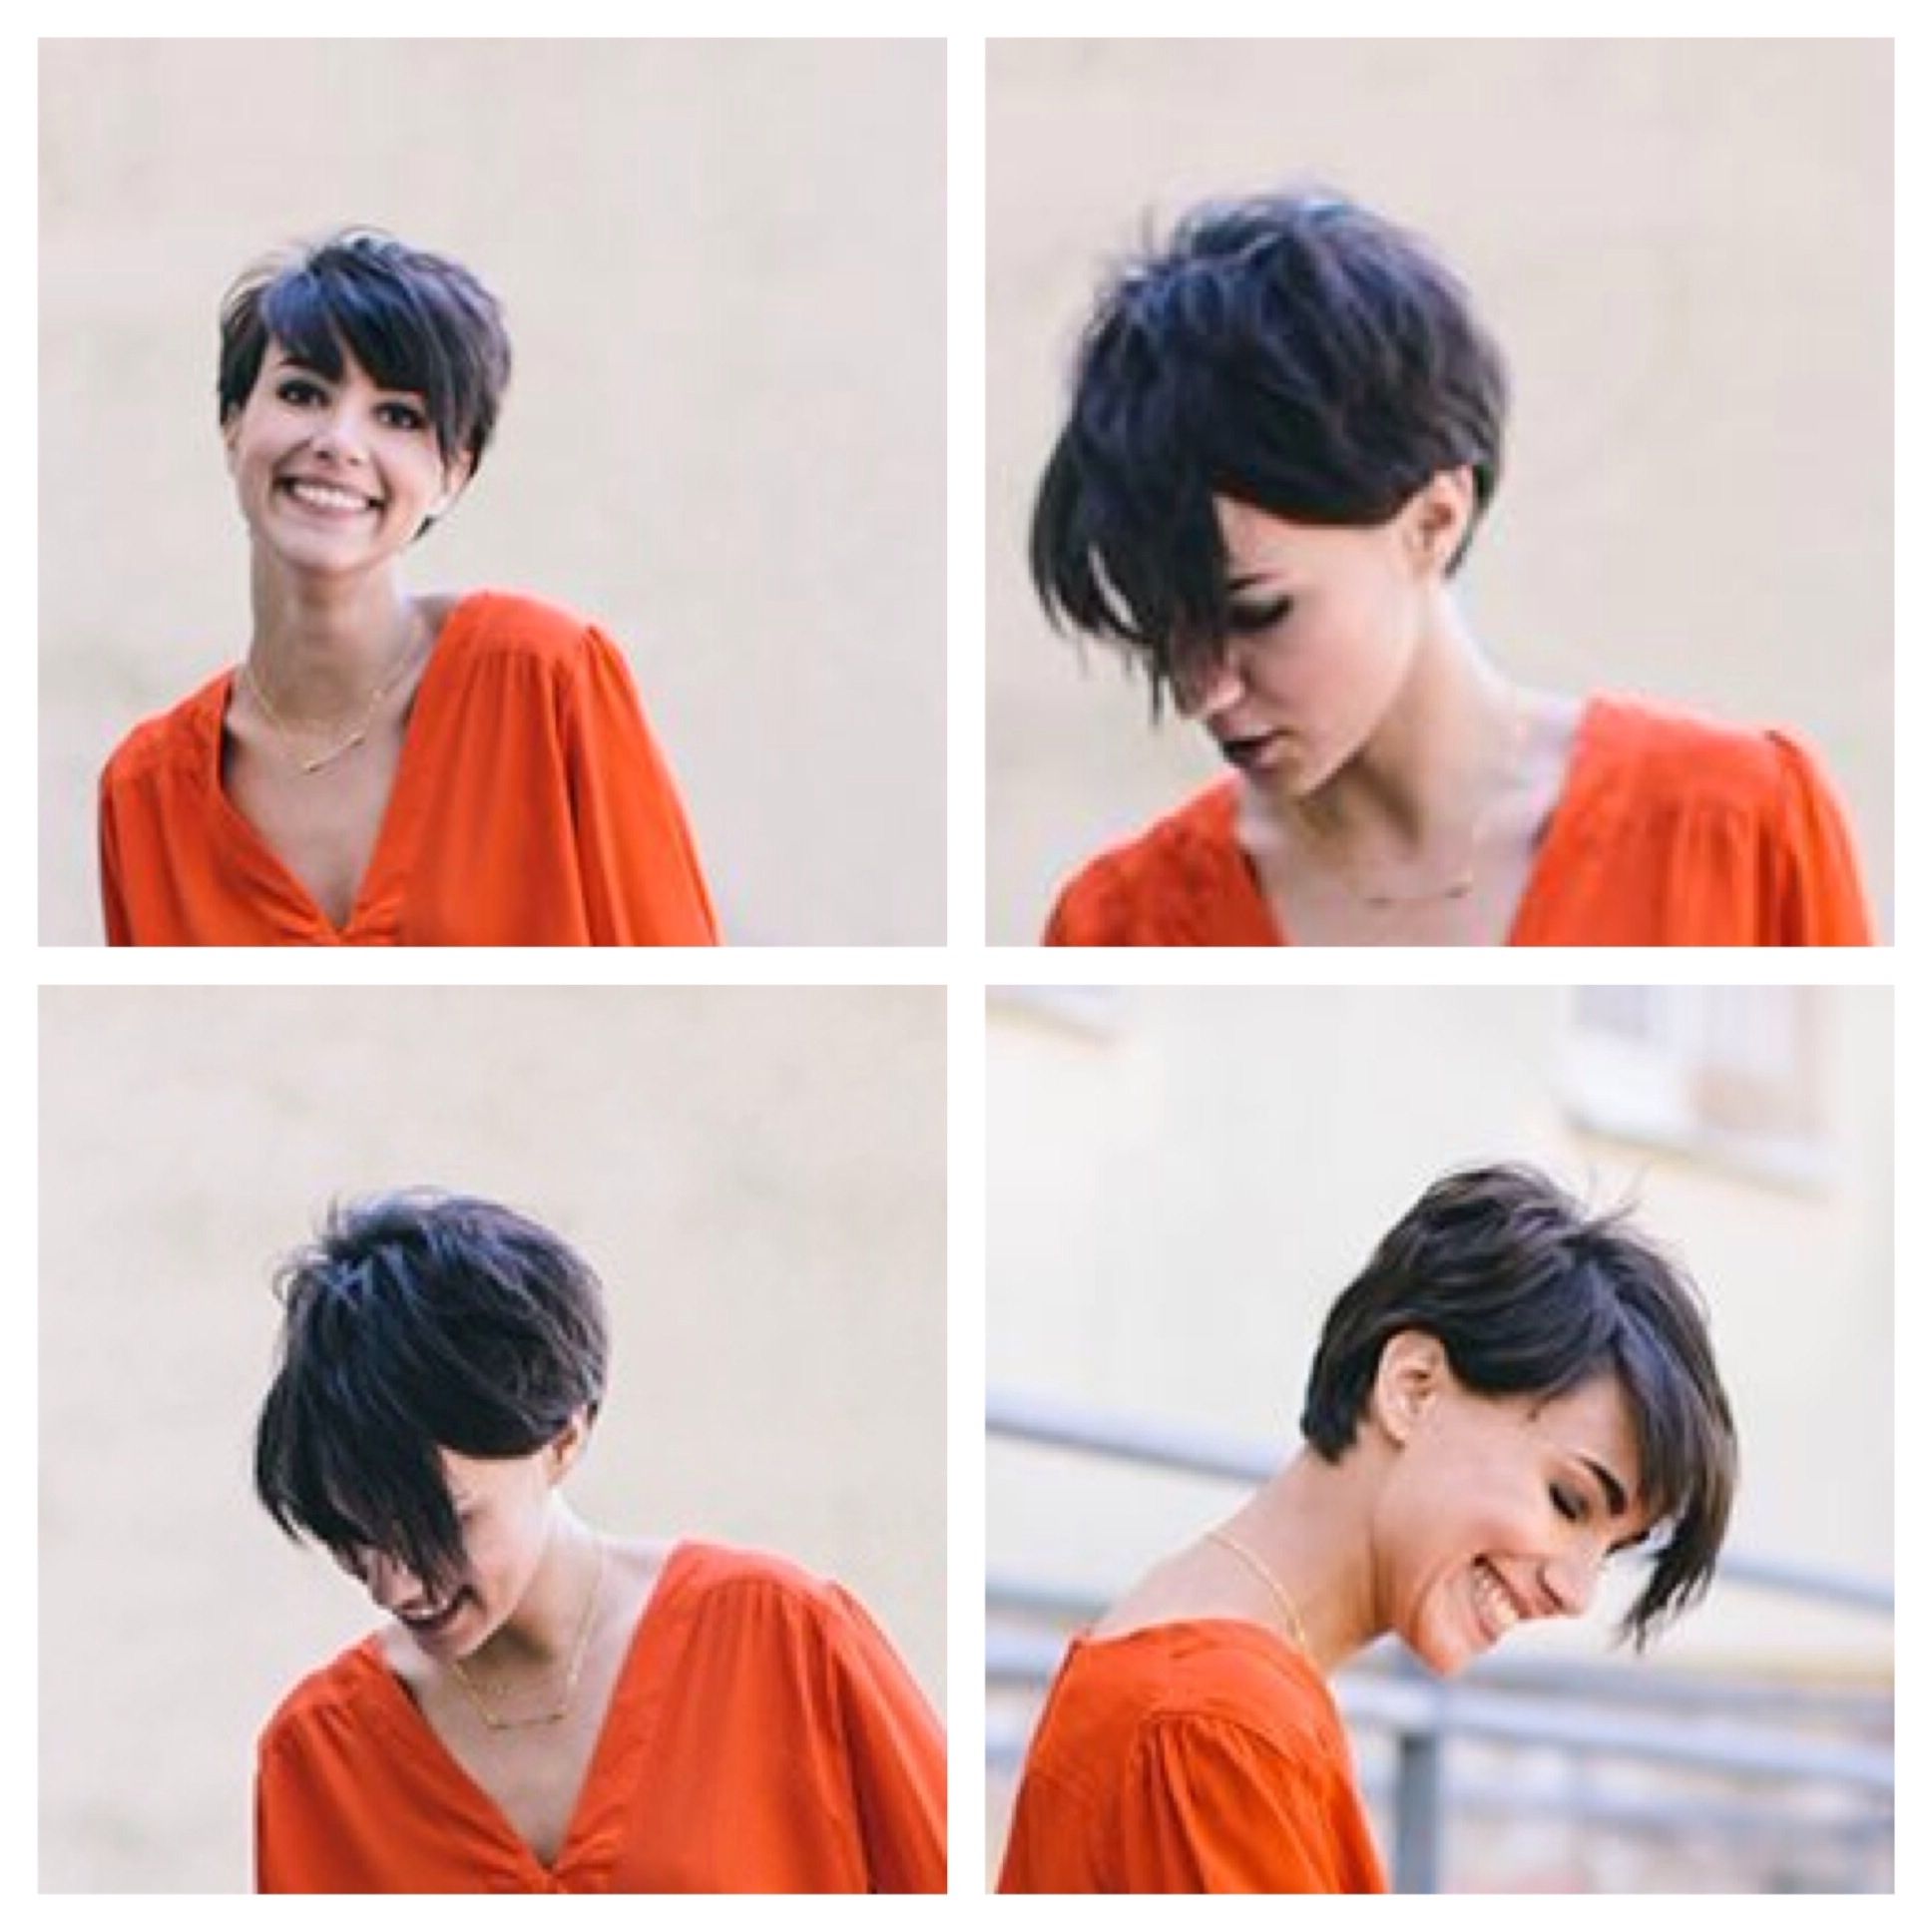 This Is A Good Pic To Bring To The Hairdresser To Show Different In Most Popular Short Pixie Hairstyles With Bangs (View 5 of 15)